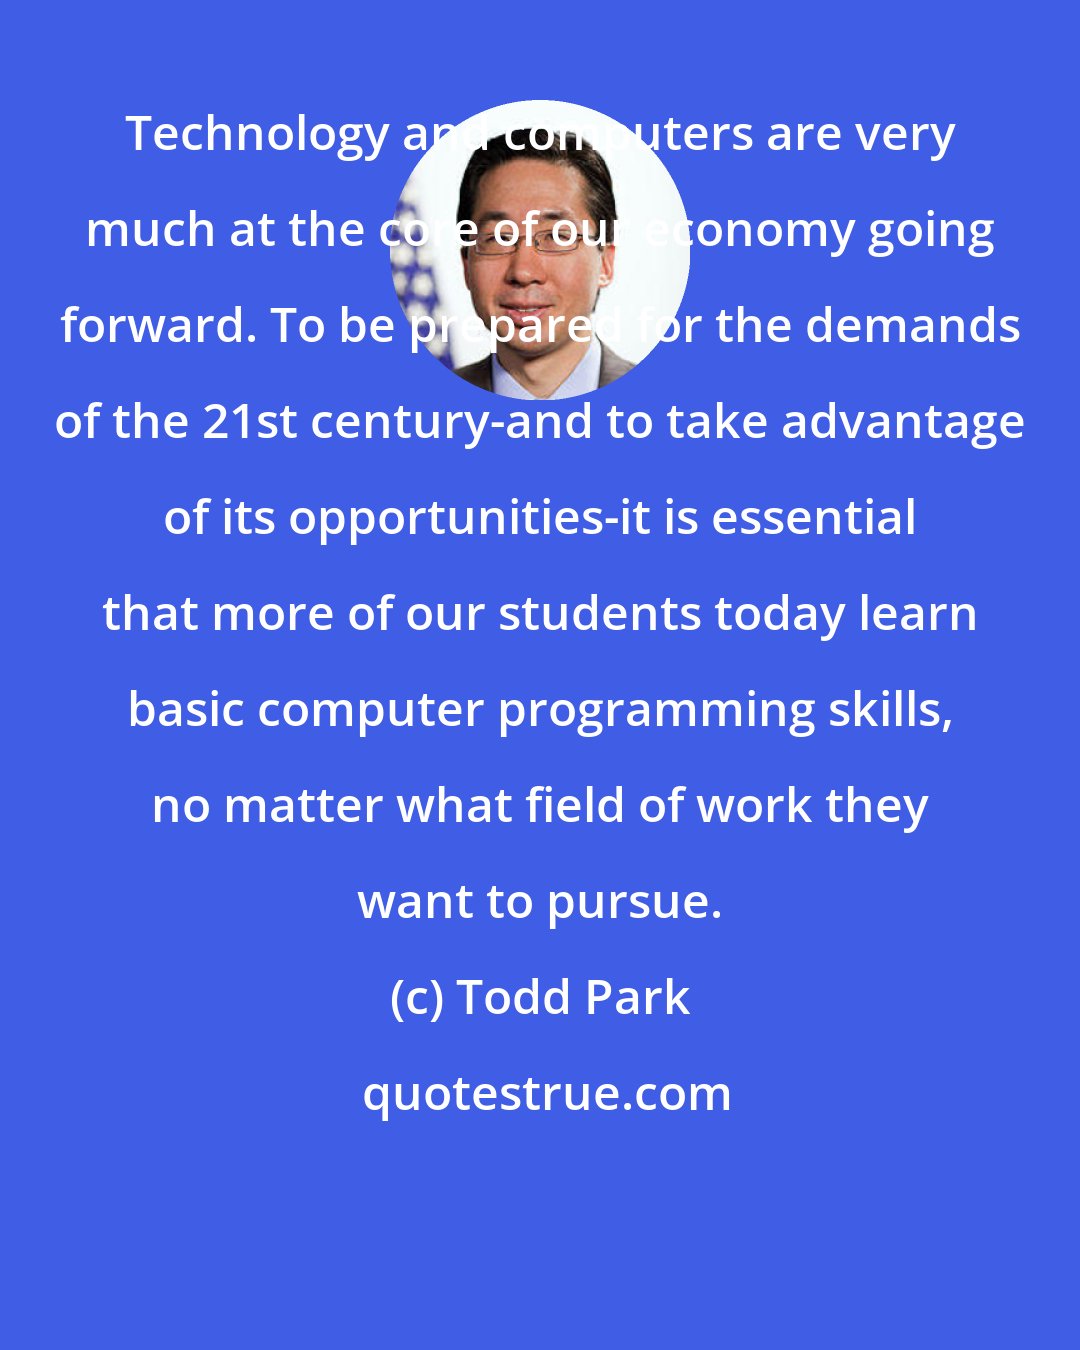 Todd Park: Technology and computers are very much at the core of our economy going forward. To be prepared for the demands of the 21st century-and to take advantage of its opportunities-it is essential that more of our students today learn basic computer programming skills, no matter what field of work they want to pursue.